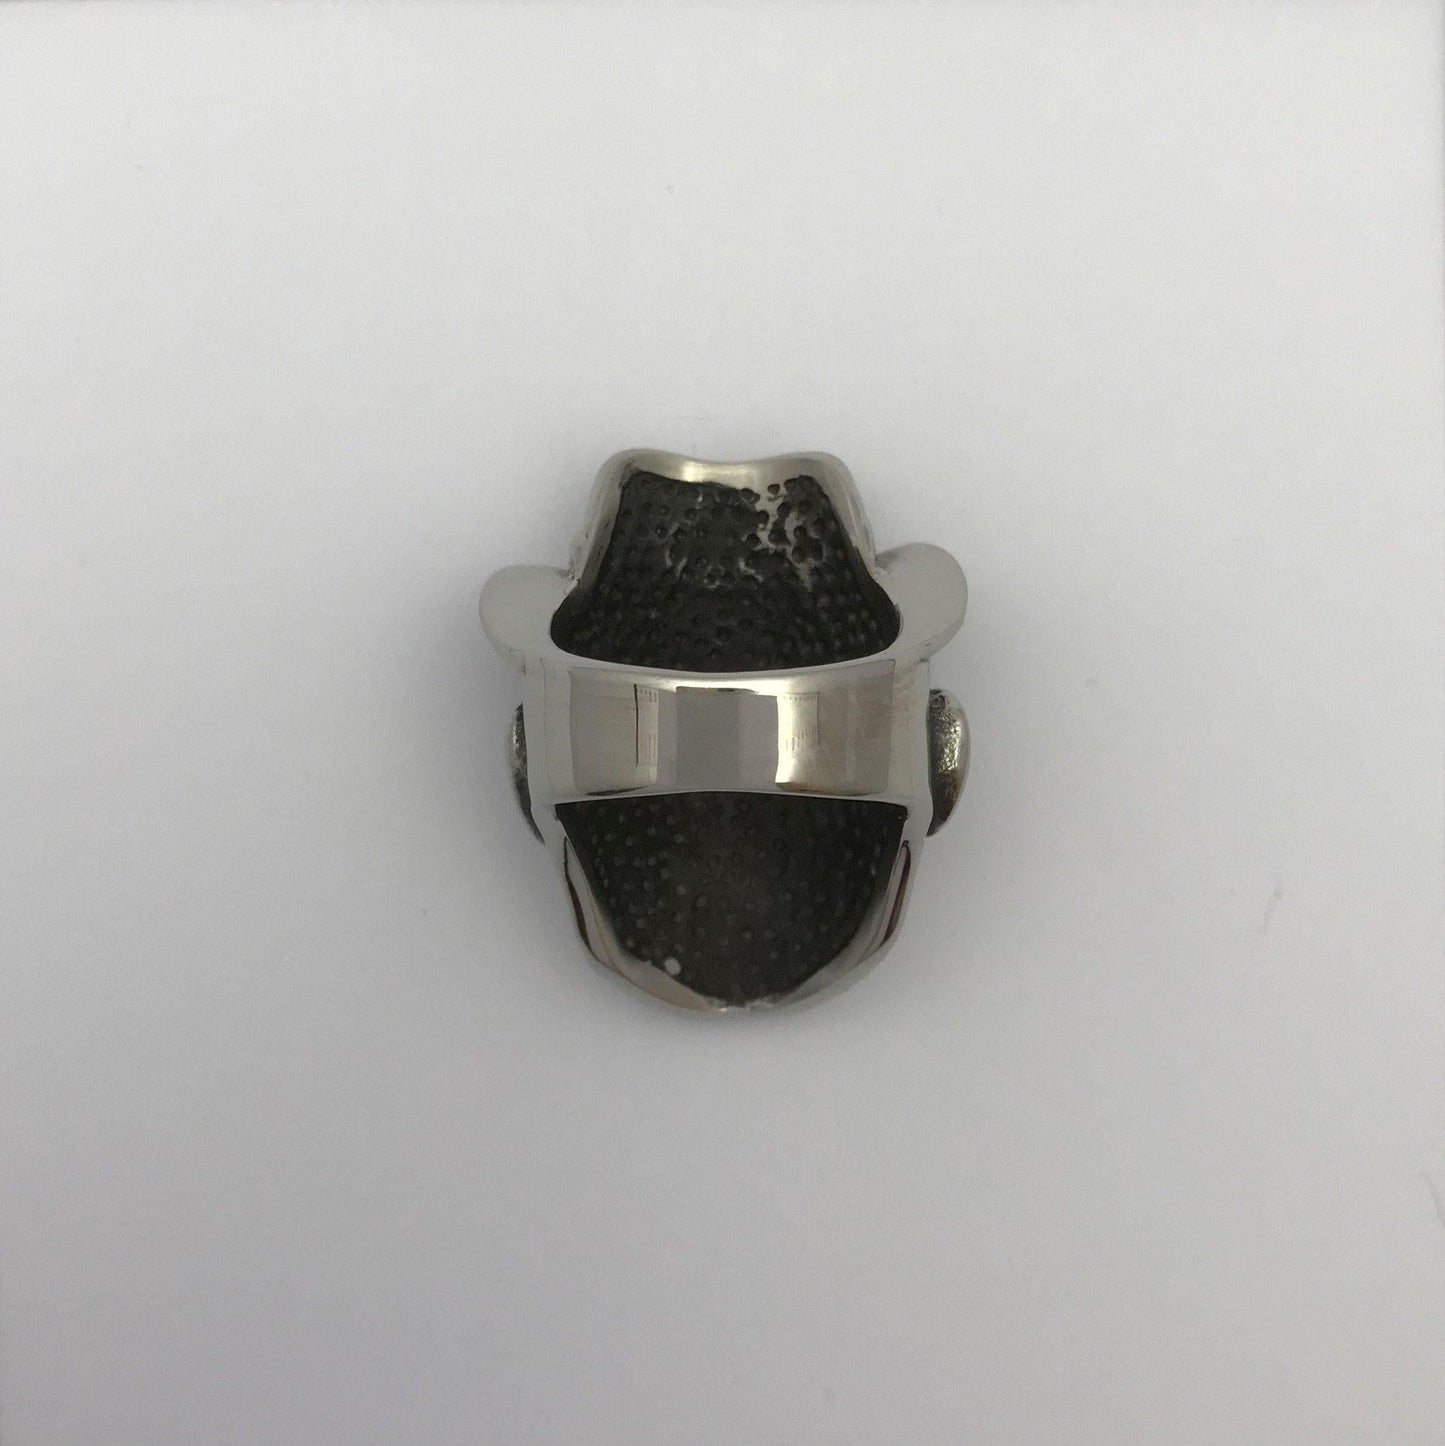 Freddy Ring - Big Dog Steel Surgical Stainless Steel